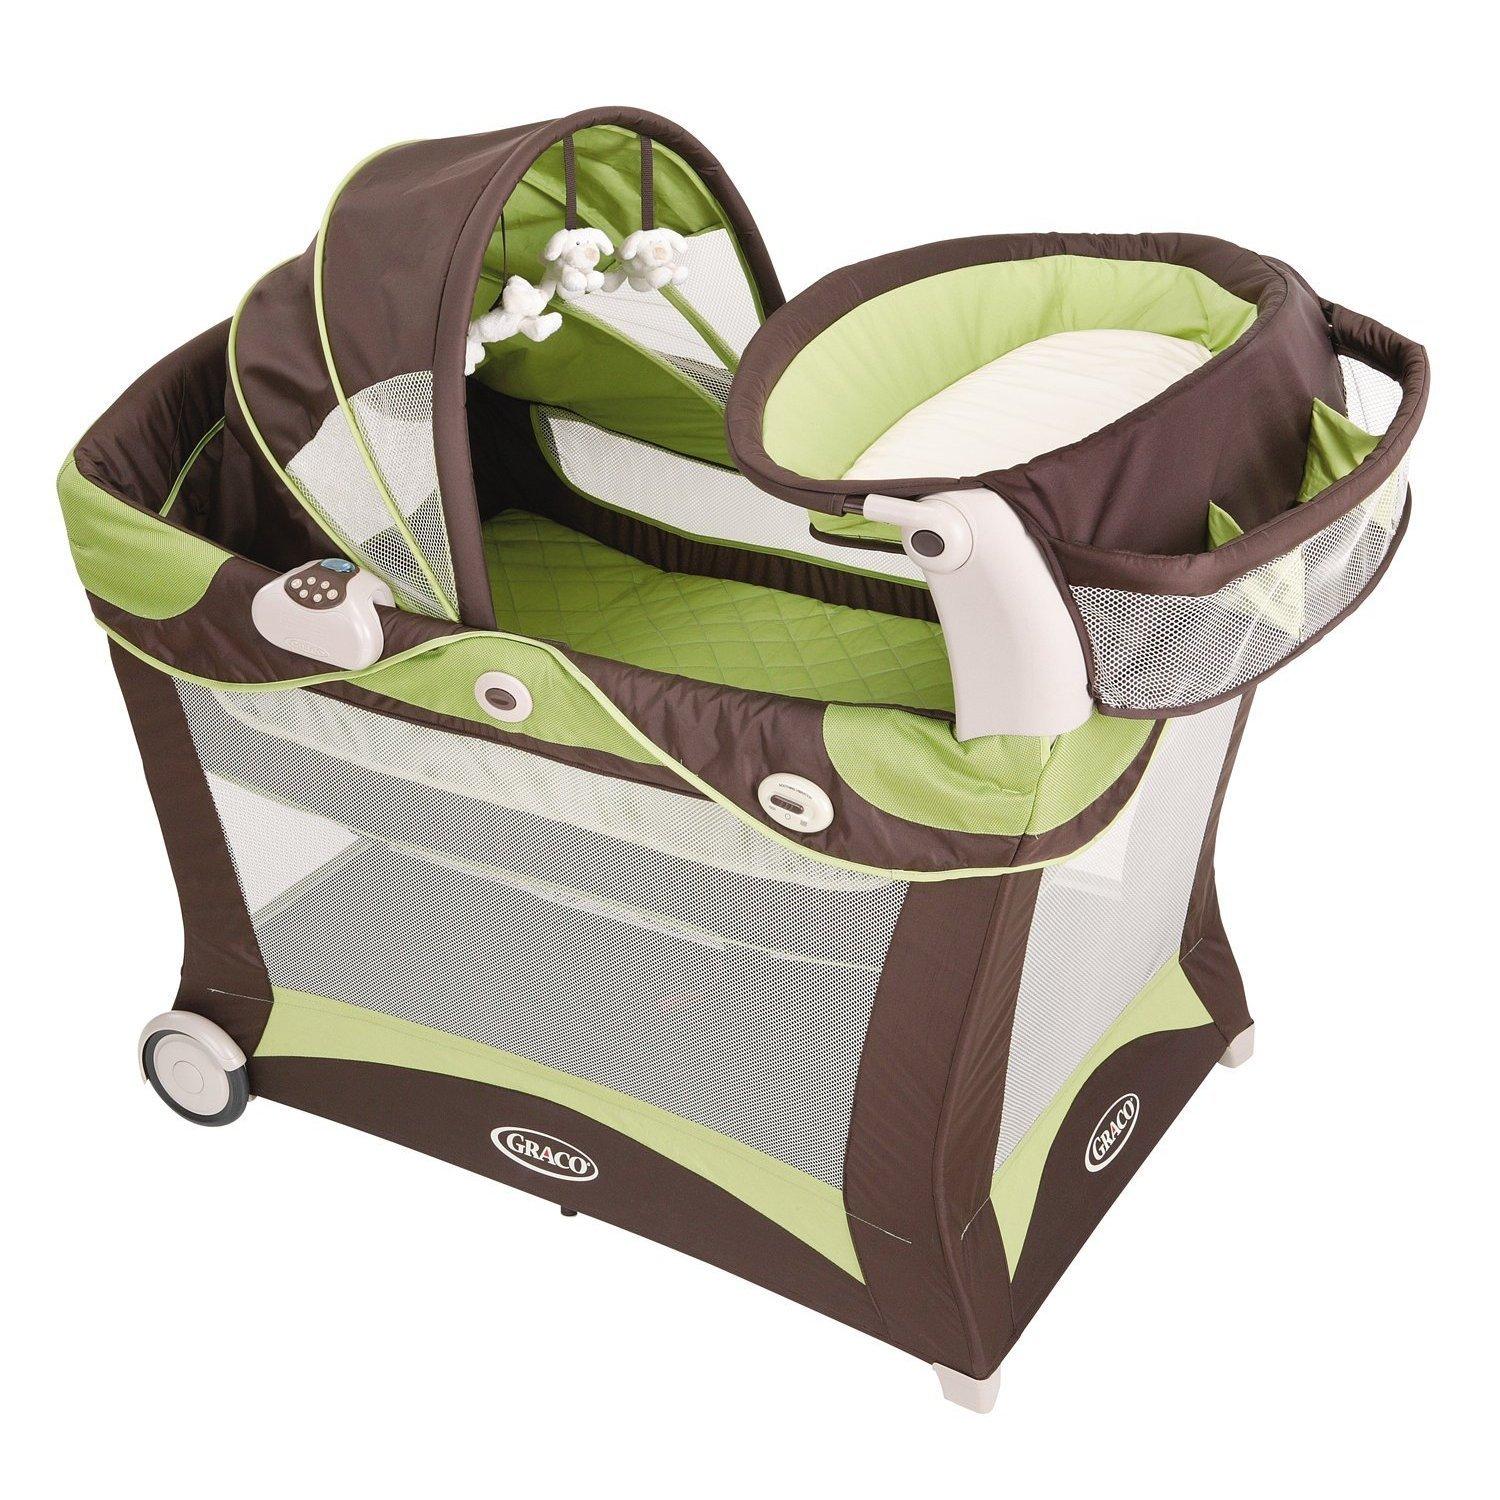 Picasso reccomend Graco baby playards with vibrator